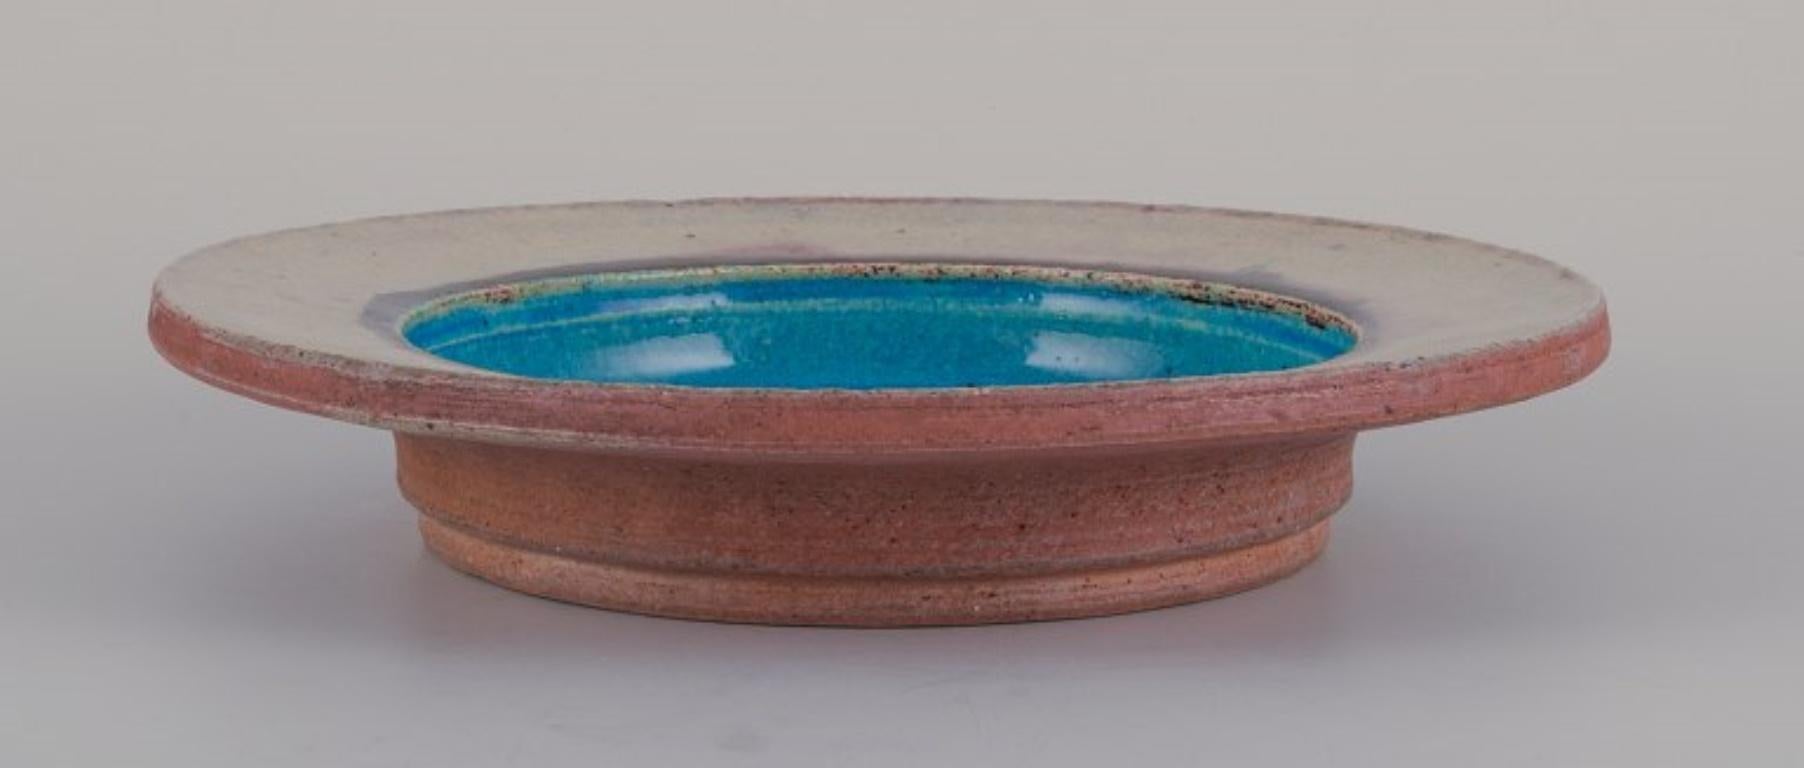 Nils Joakim Kähler (1906-1979) for Kähler, Denmark. 
Round ceramic bowl in a modernist style. Turquoise and cream-coloured glaze.
Approximately from the 1960s.
Marked.
In perfect condition.
Dimensions: Diameter 26.5 cm x Height 4.7 cm.

Nils Joakim